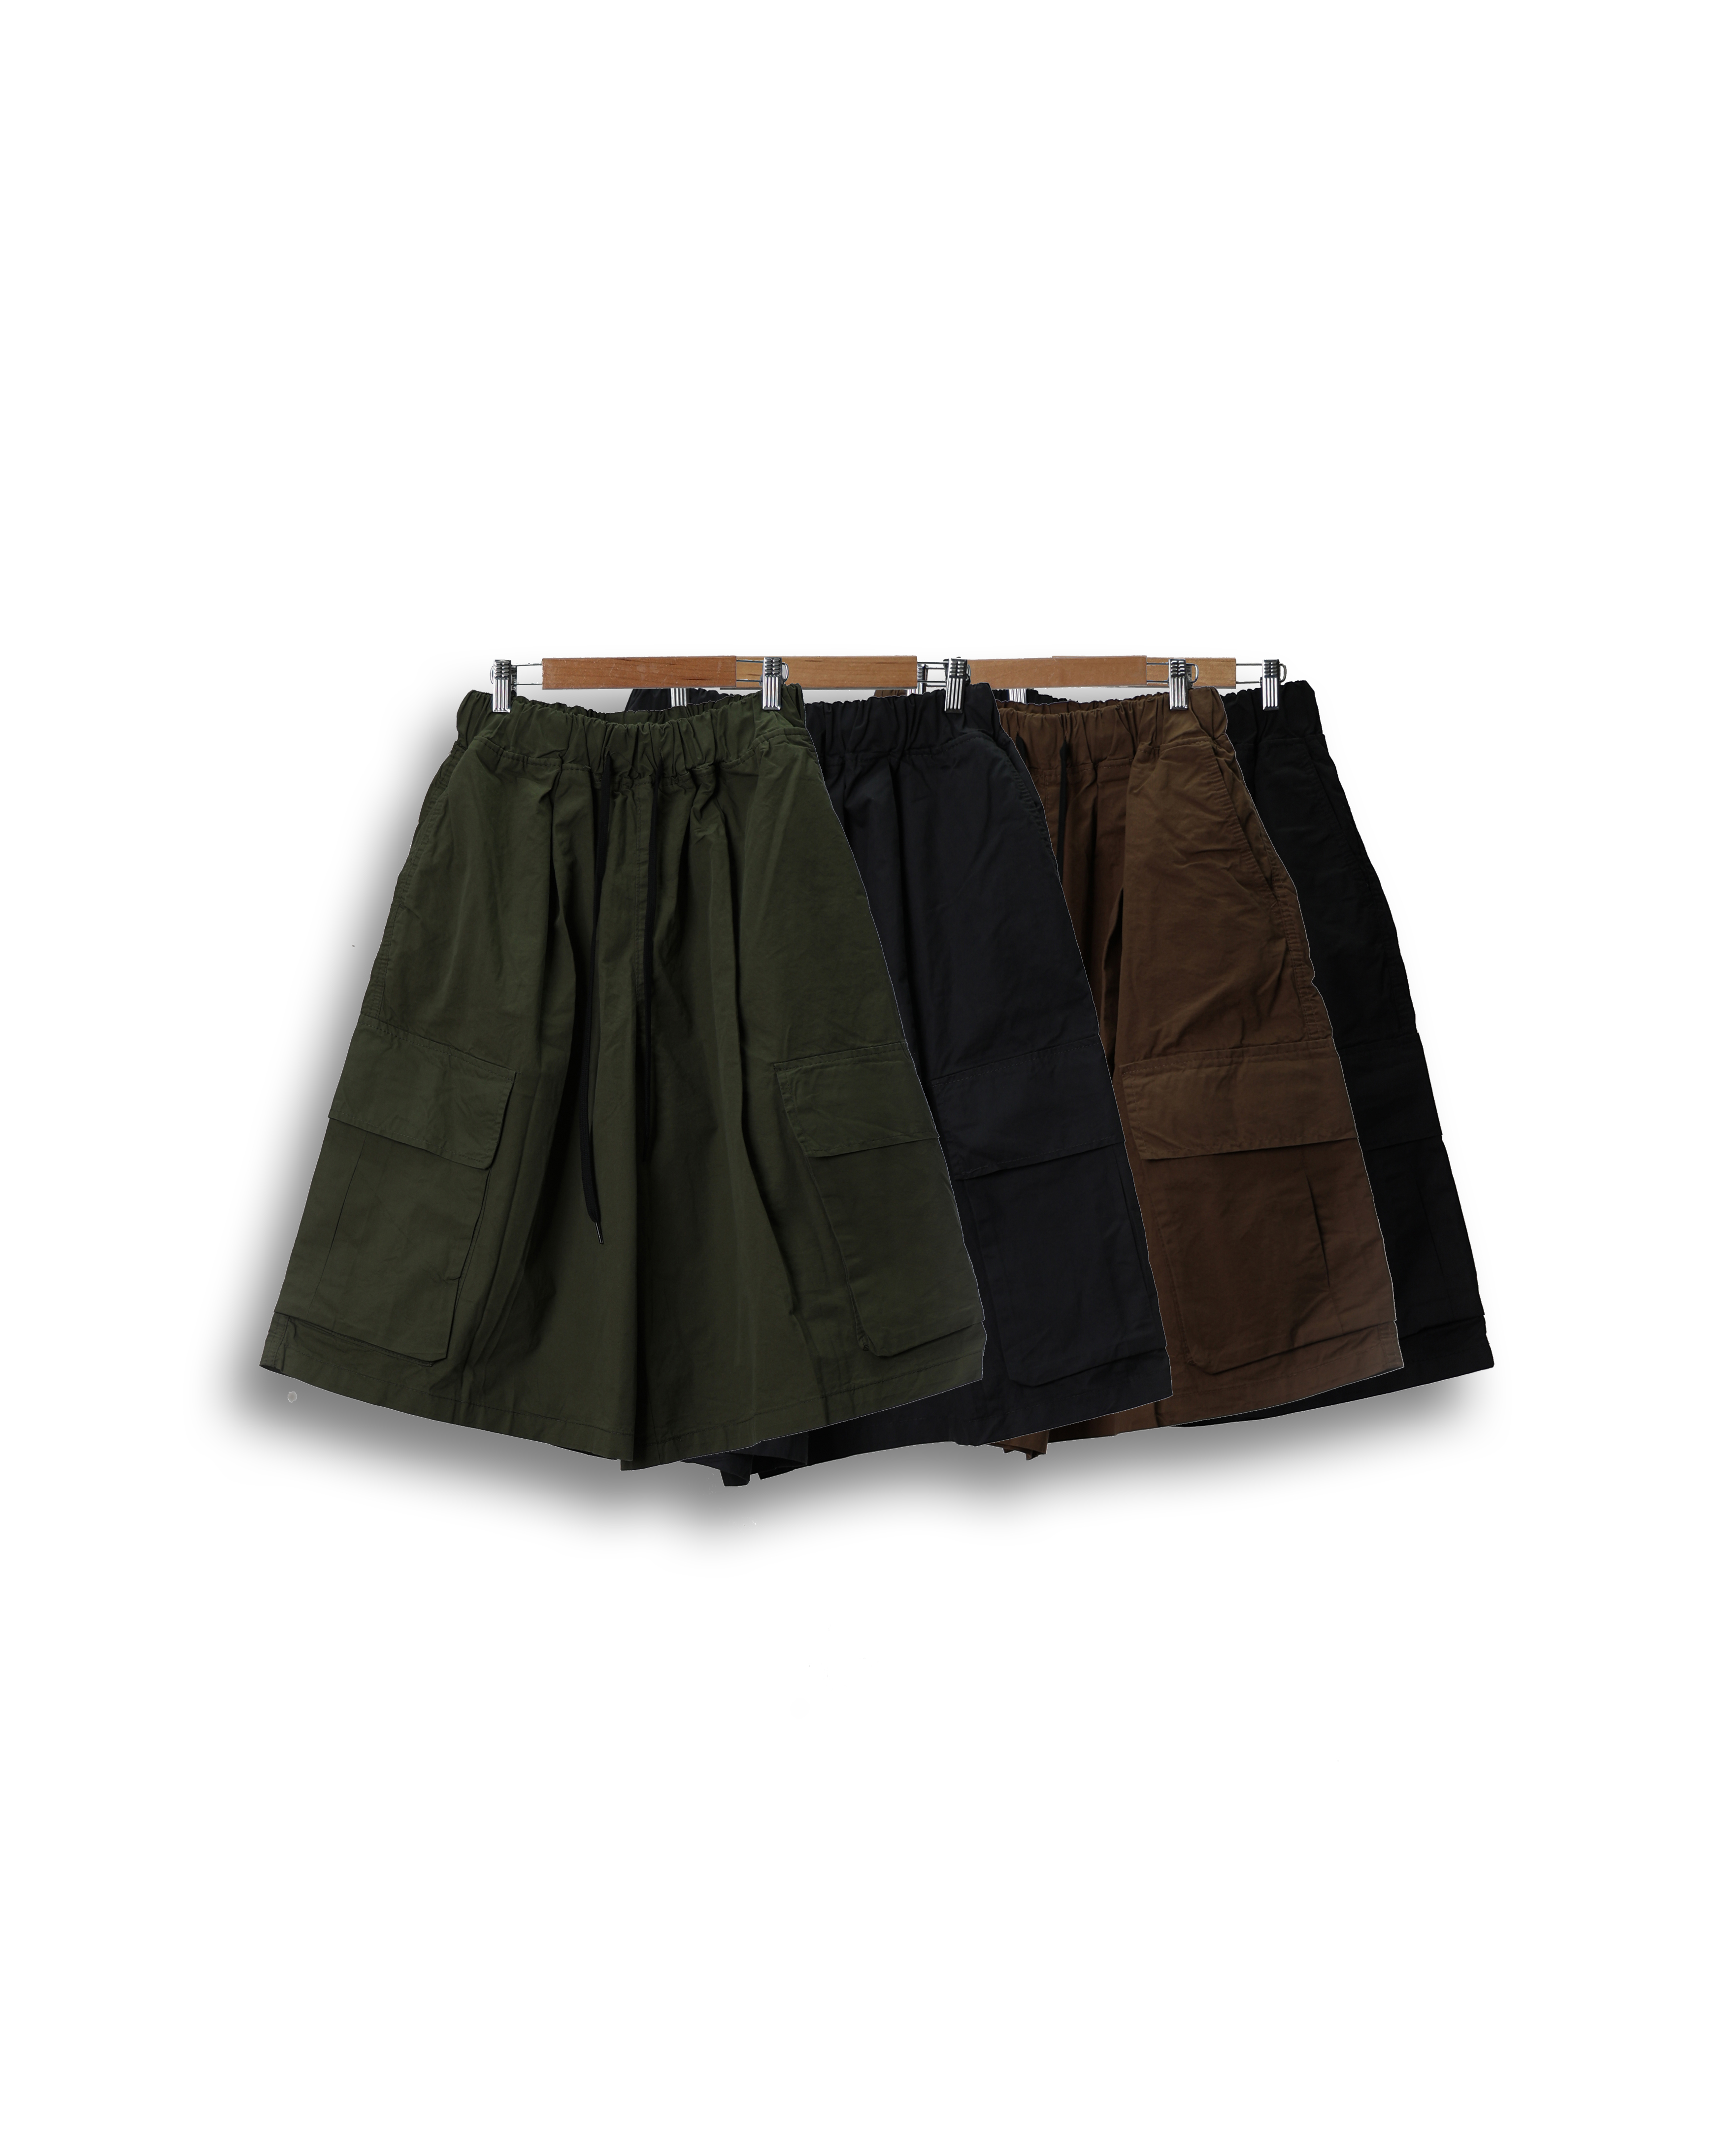 MYPEO 9478 Maxi 8th Cargo Loose Pants (Black/Charcoal/Brown/Olive)